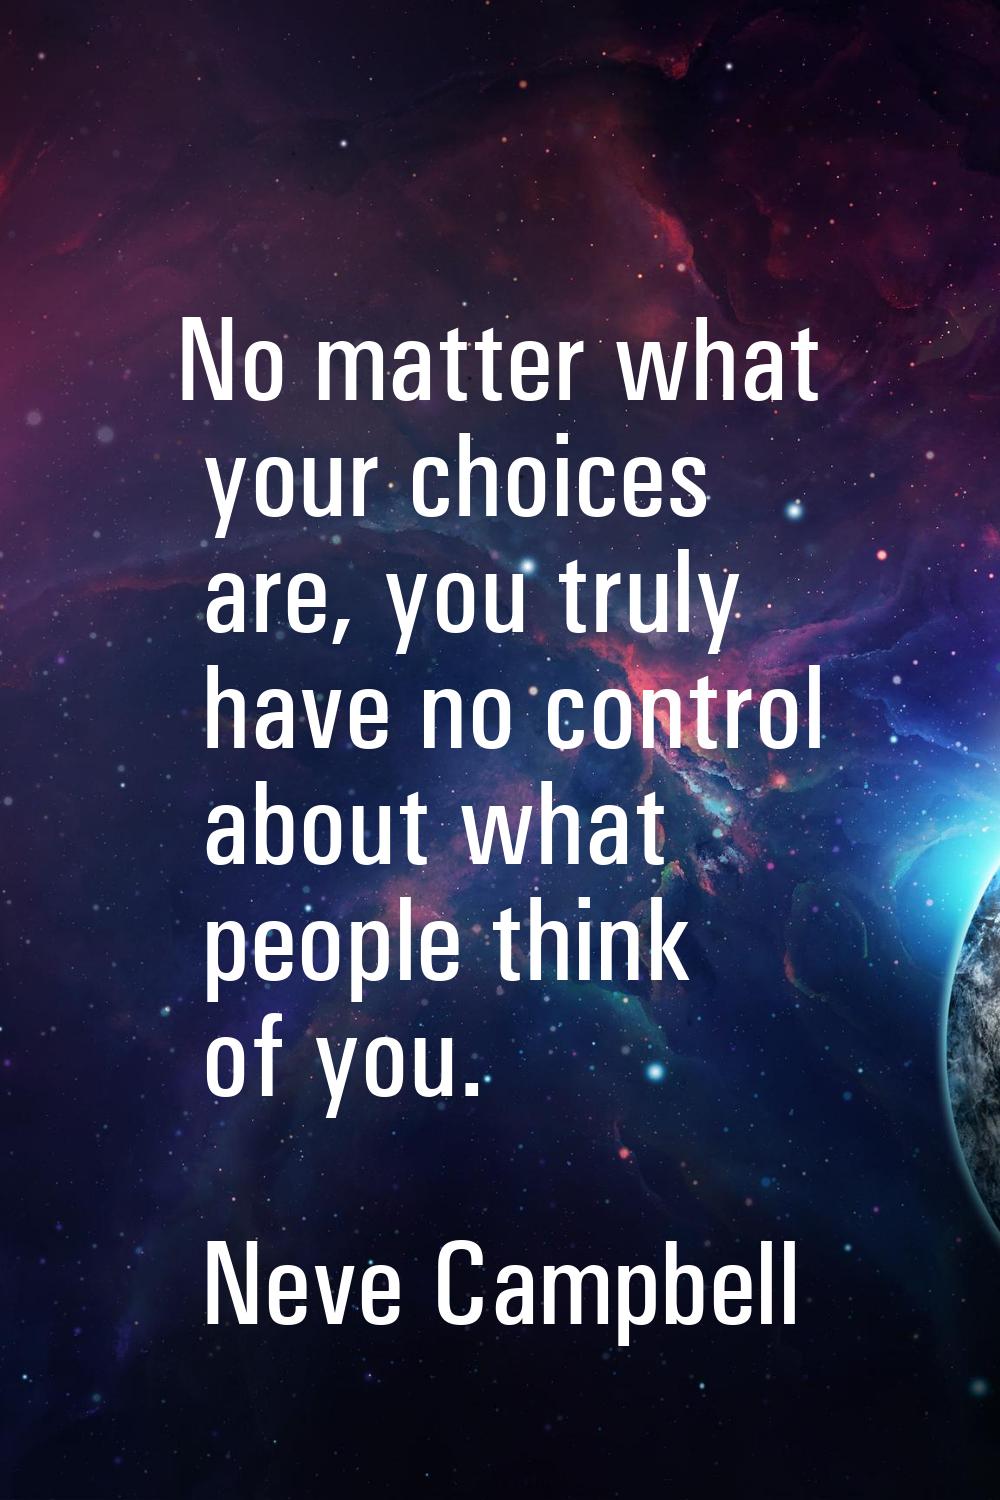 No matter what your choices are, you truly have no control about what people think of you.